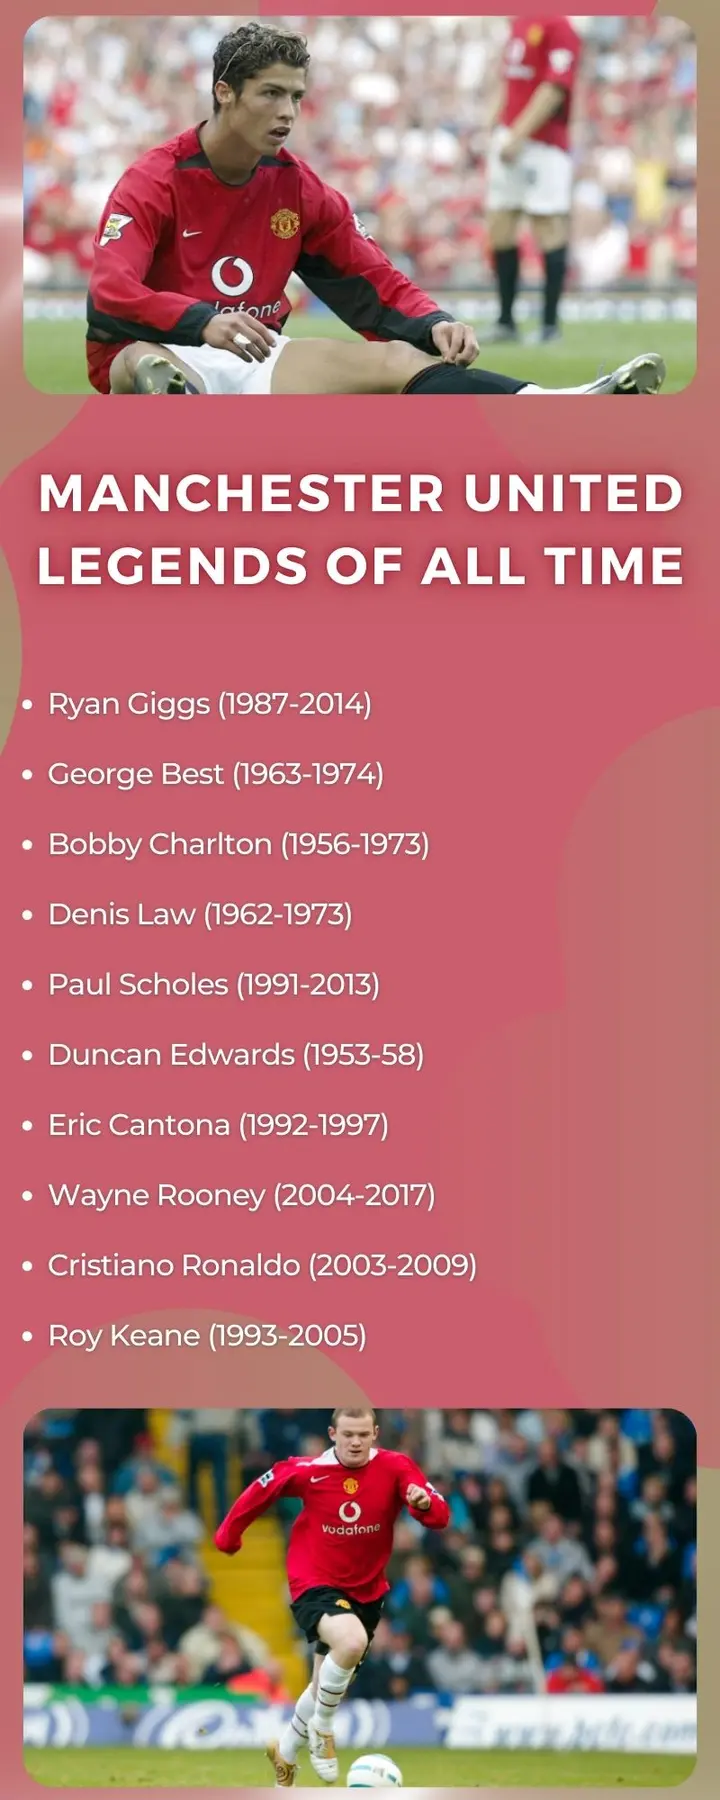 Manchester United legends of all time